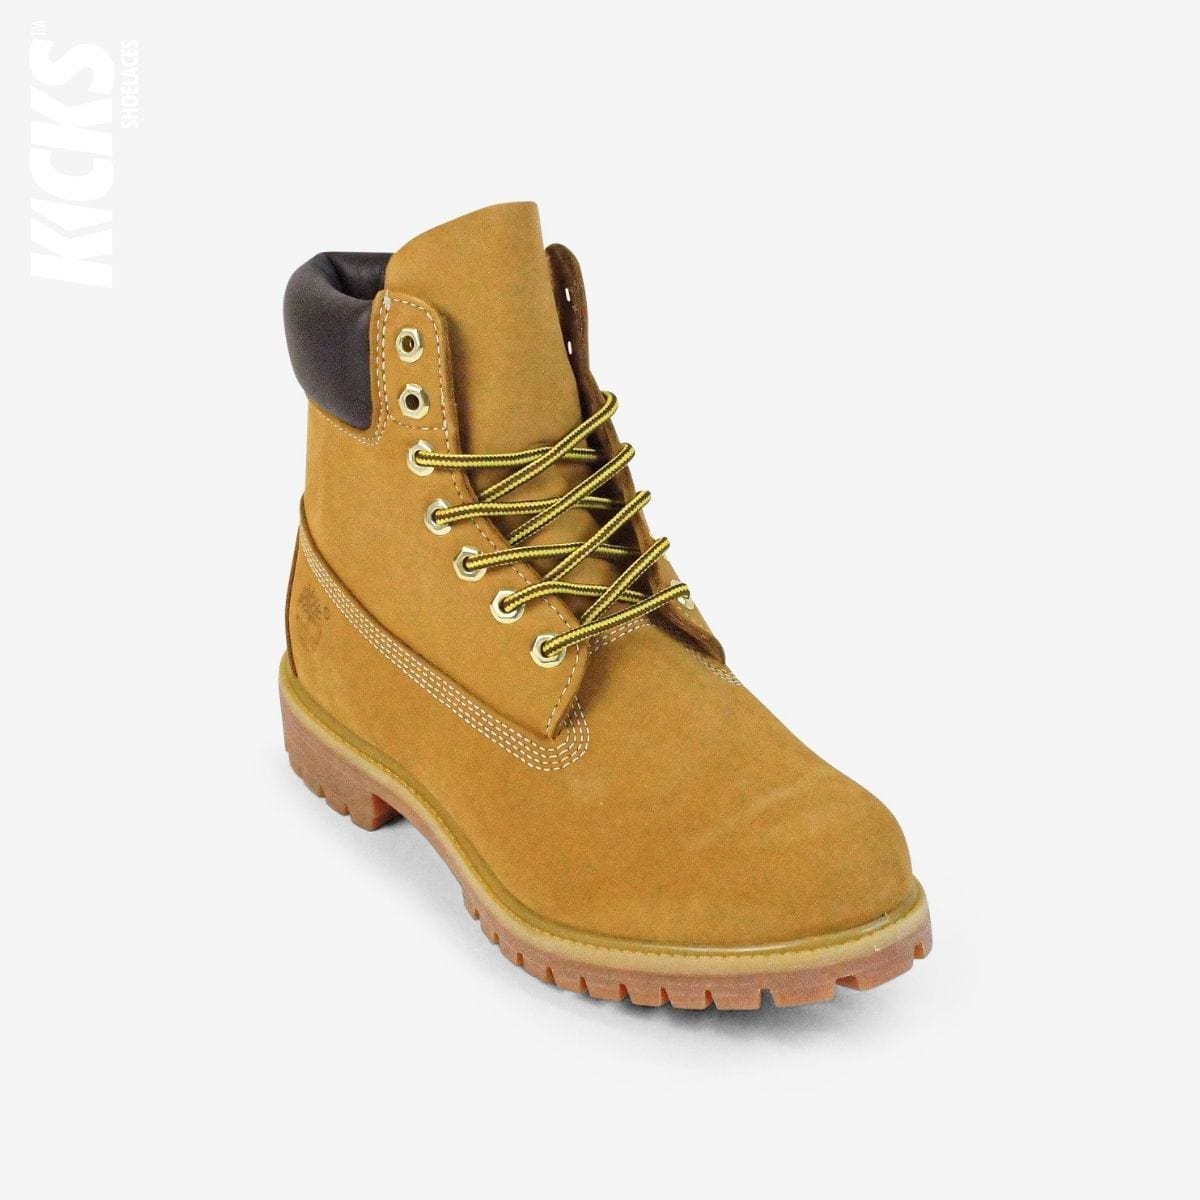 shoelaces-online-yellow-and-brown-boot-laces-on-timberland-boots